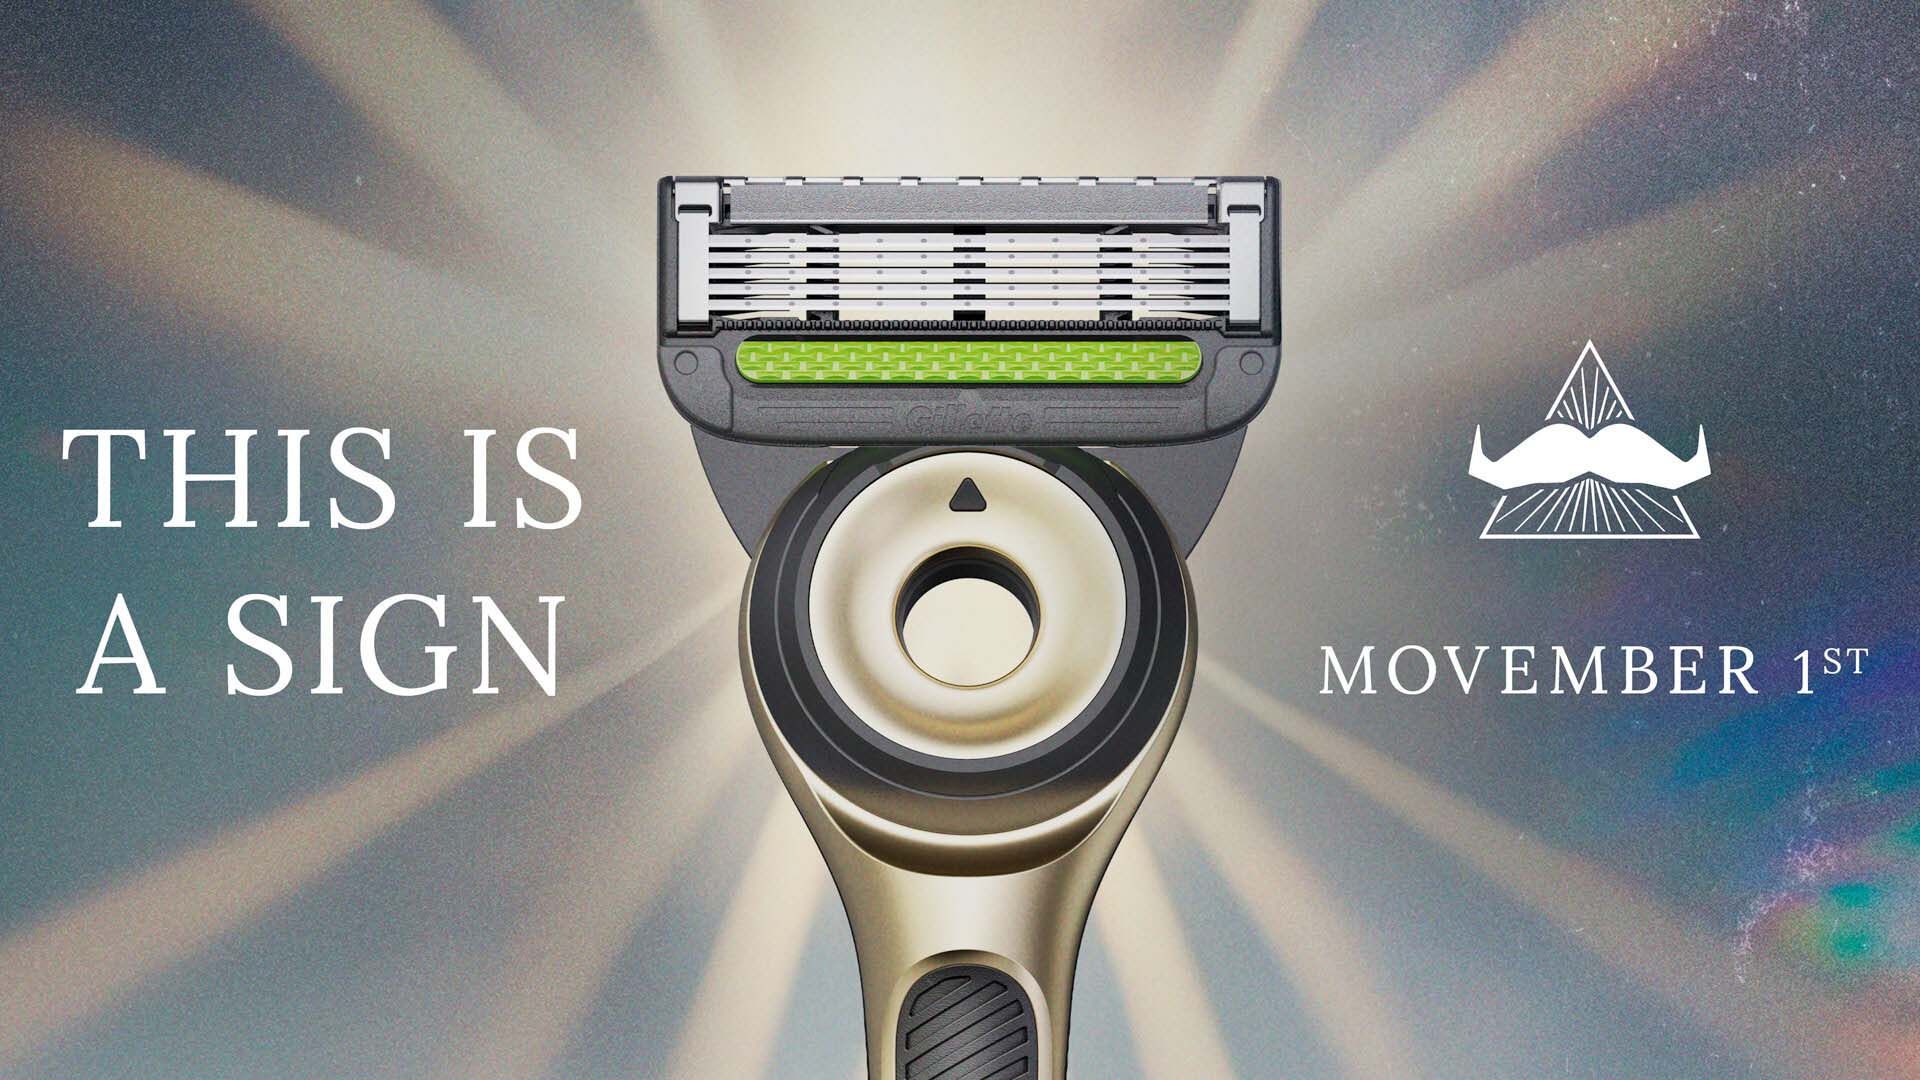 An image of a Gillette razor blade. Superimposed text says: "This is a sign. Movember 1st."